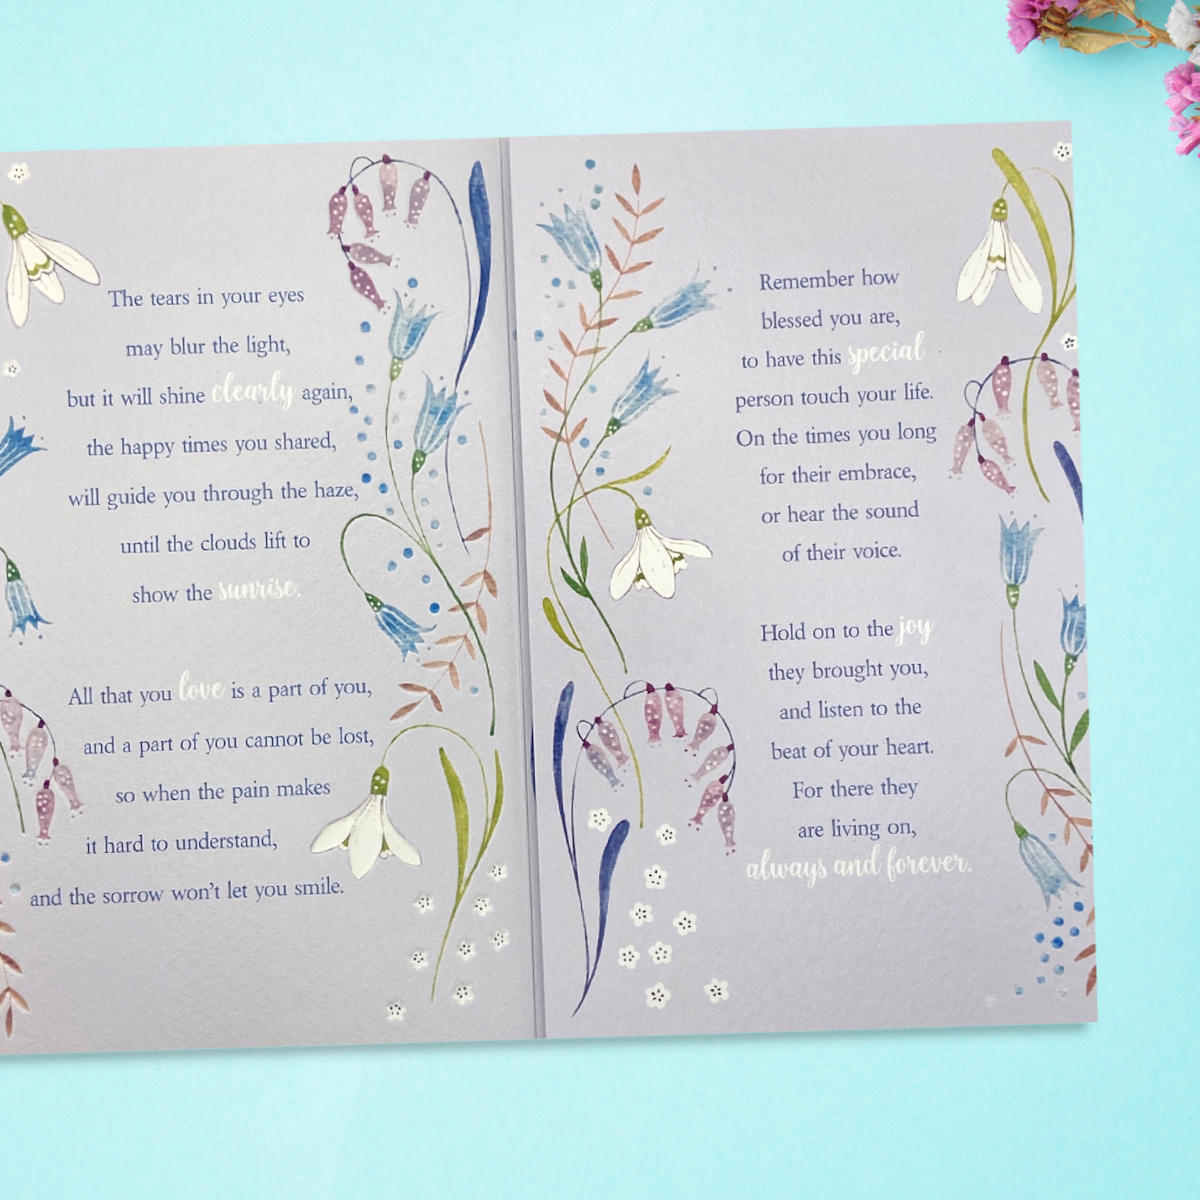 Inside with two pages of verse with floral borders